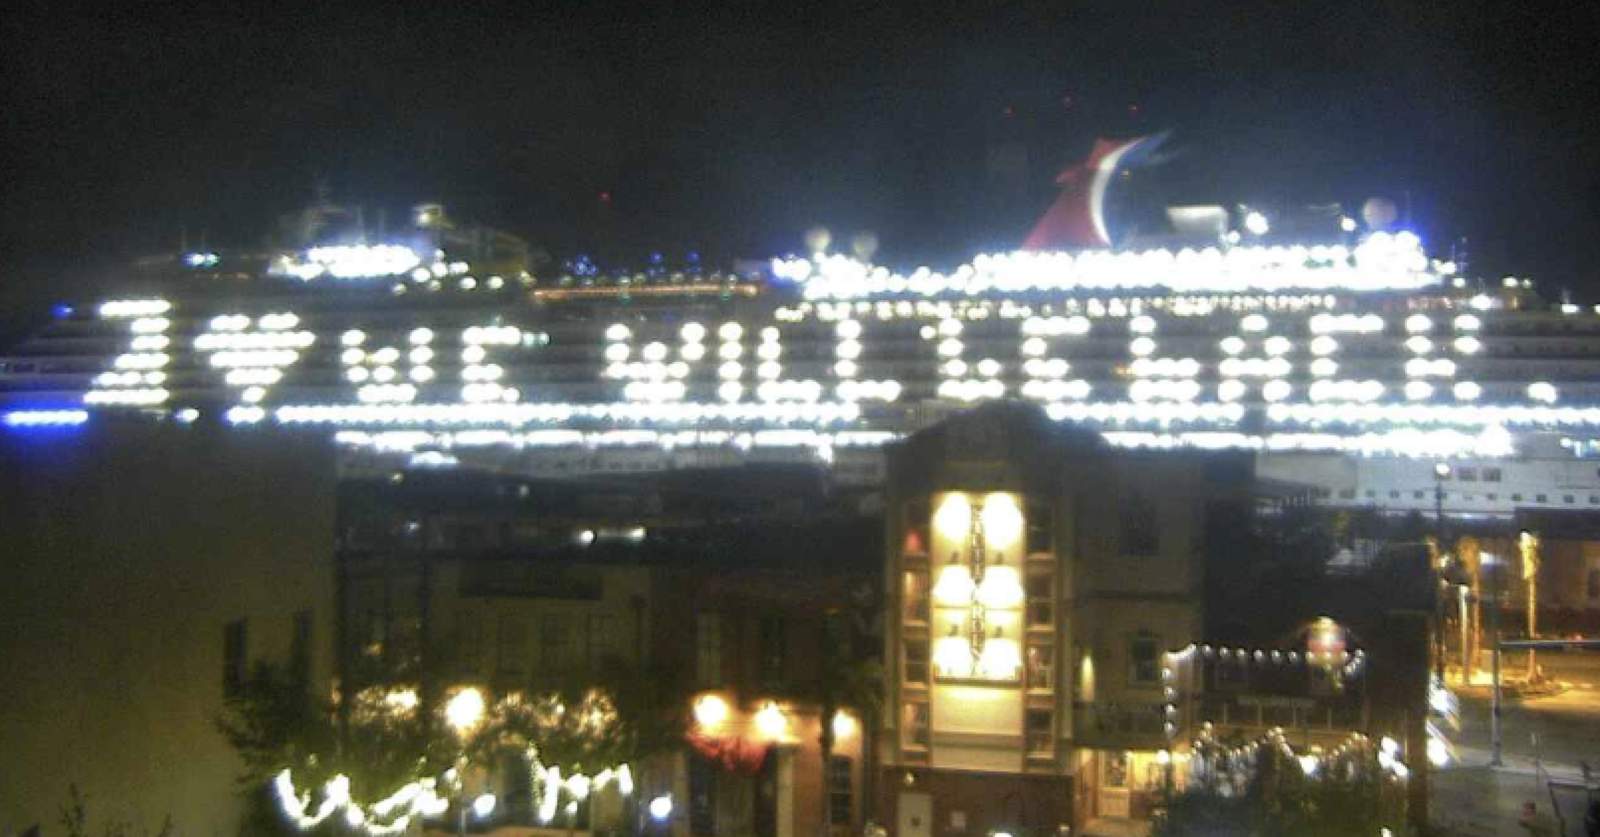 ‘We will be back:' Carnival cruise ship in Galveston lights up with message of hope